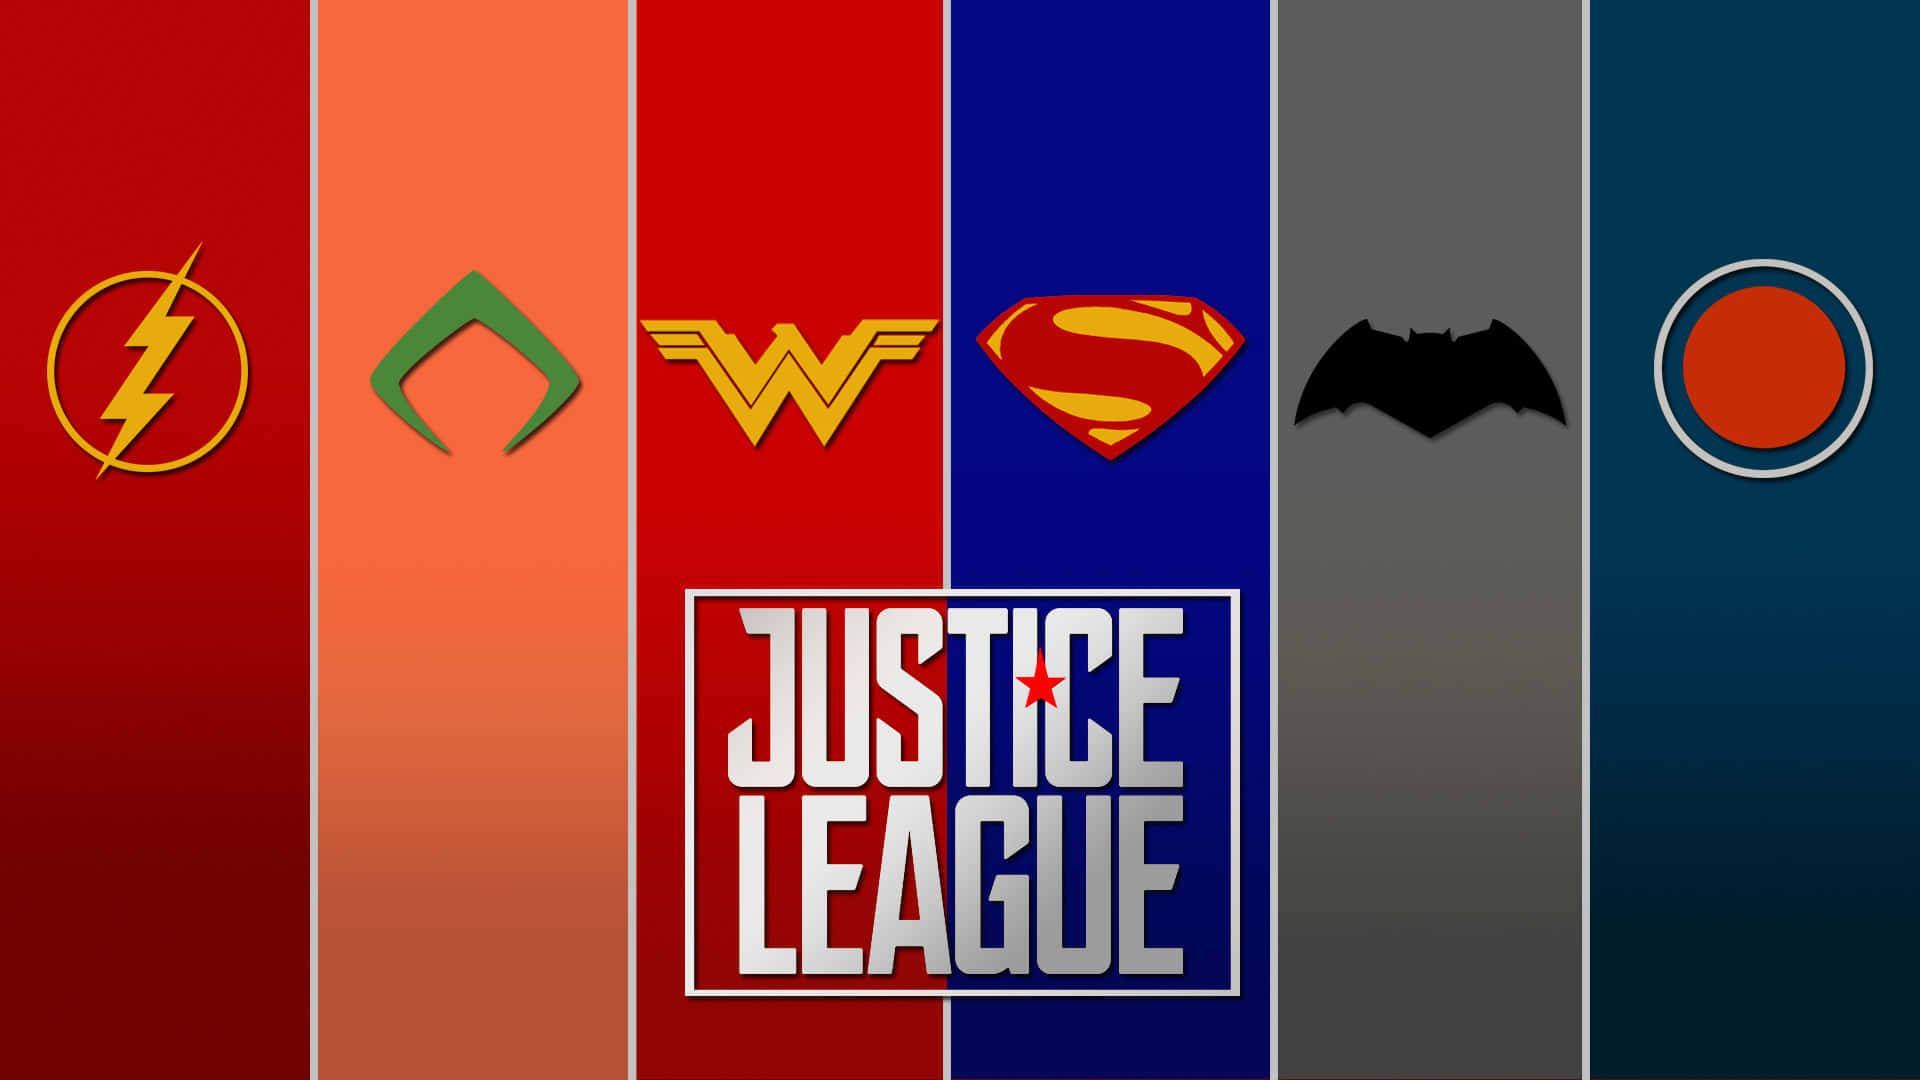 Heroes Unite - The Justice League prepares for action in this stunning HD wallpaper.